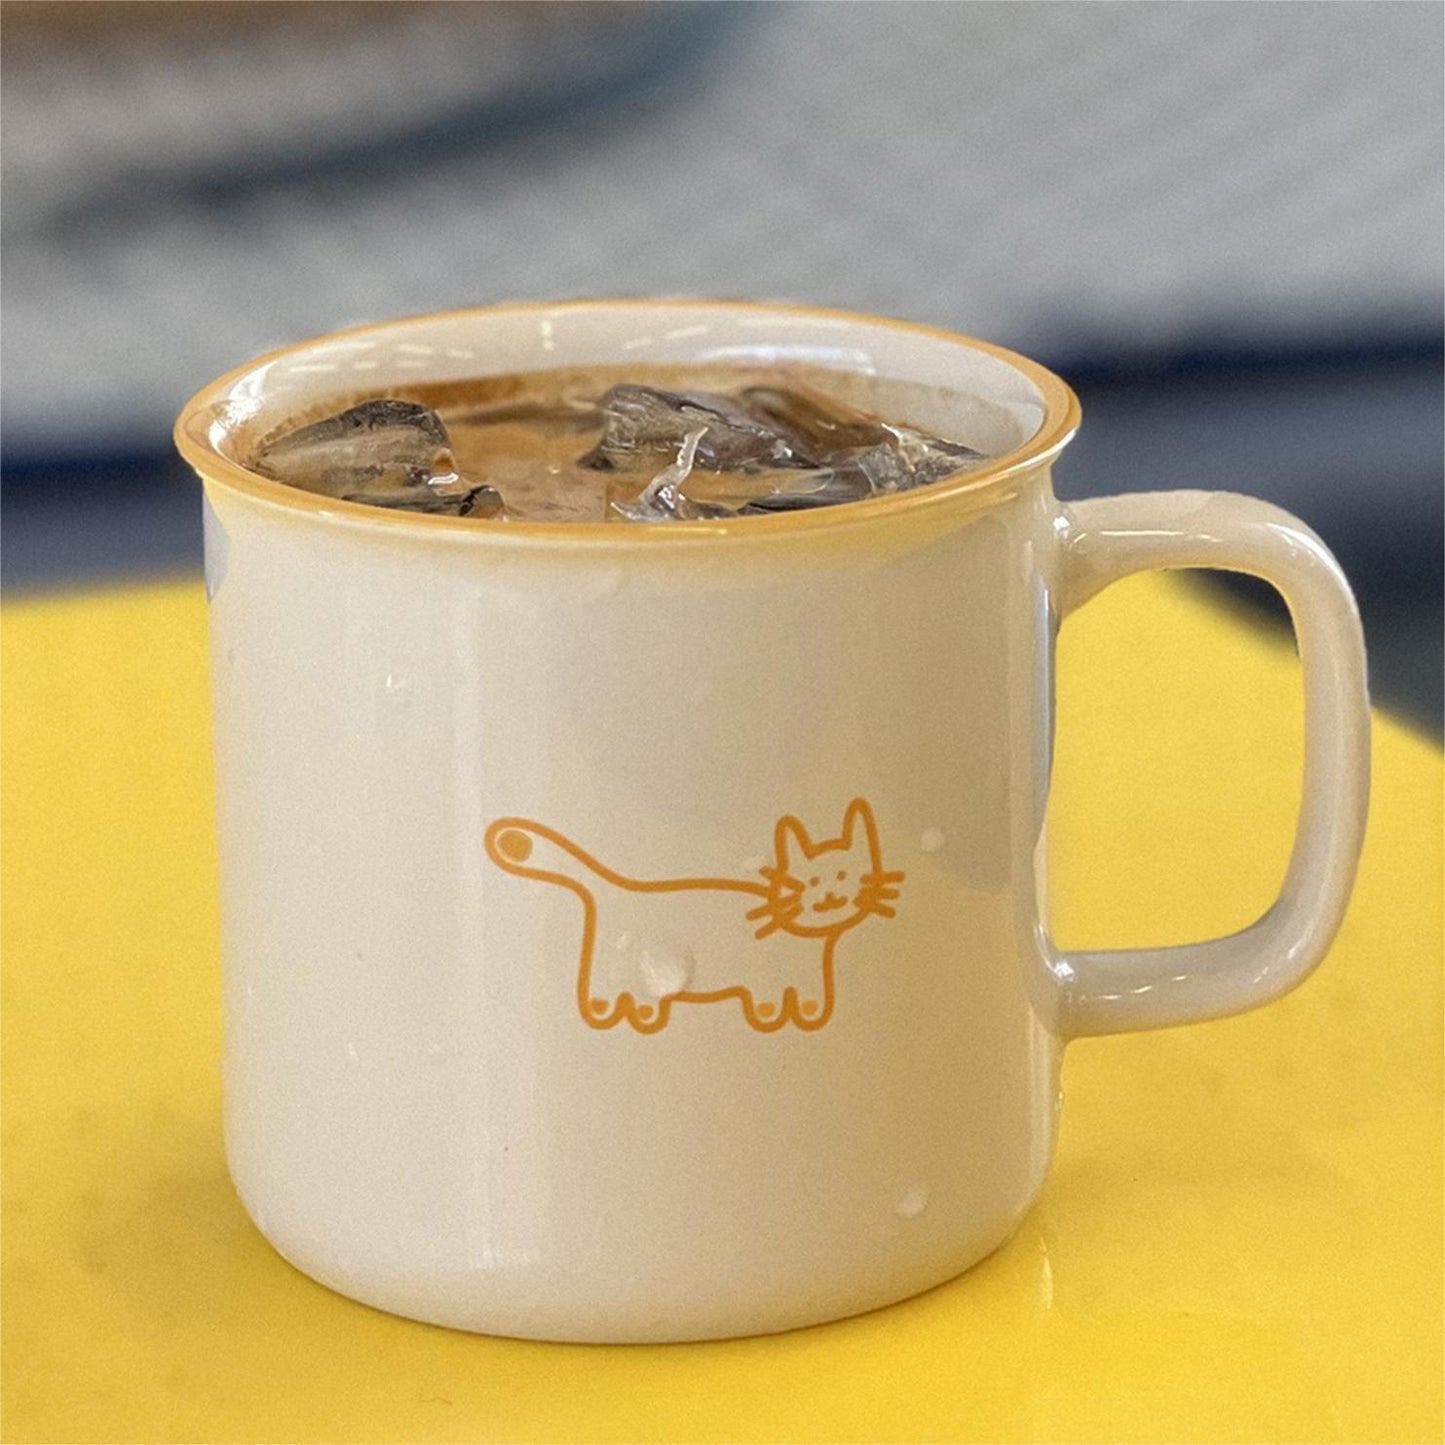 Fais un Beau Rêve Coffee Mug, Orange Color with Cut Cat illustration. Pawsome Gift for Cat Lovers and Cat Owners.